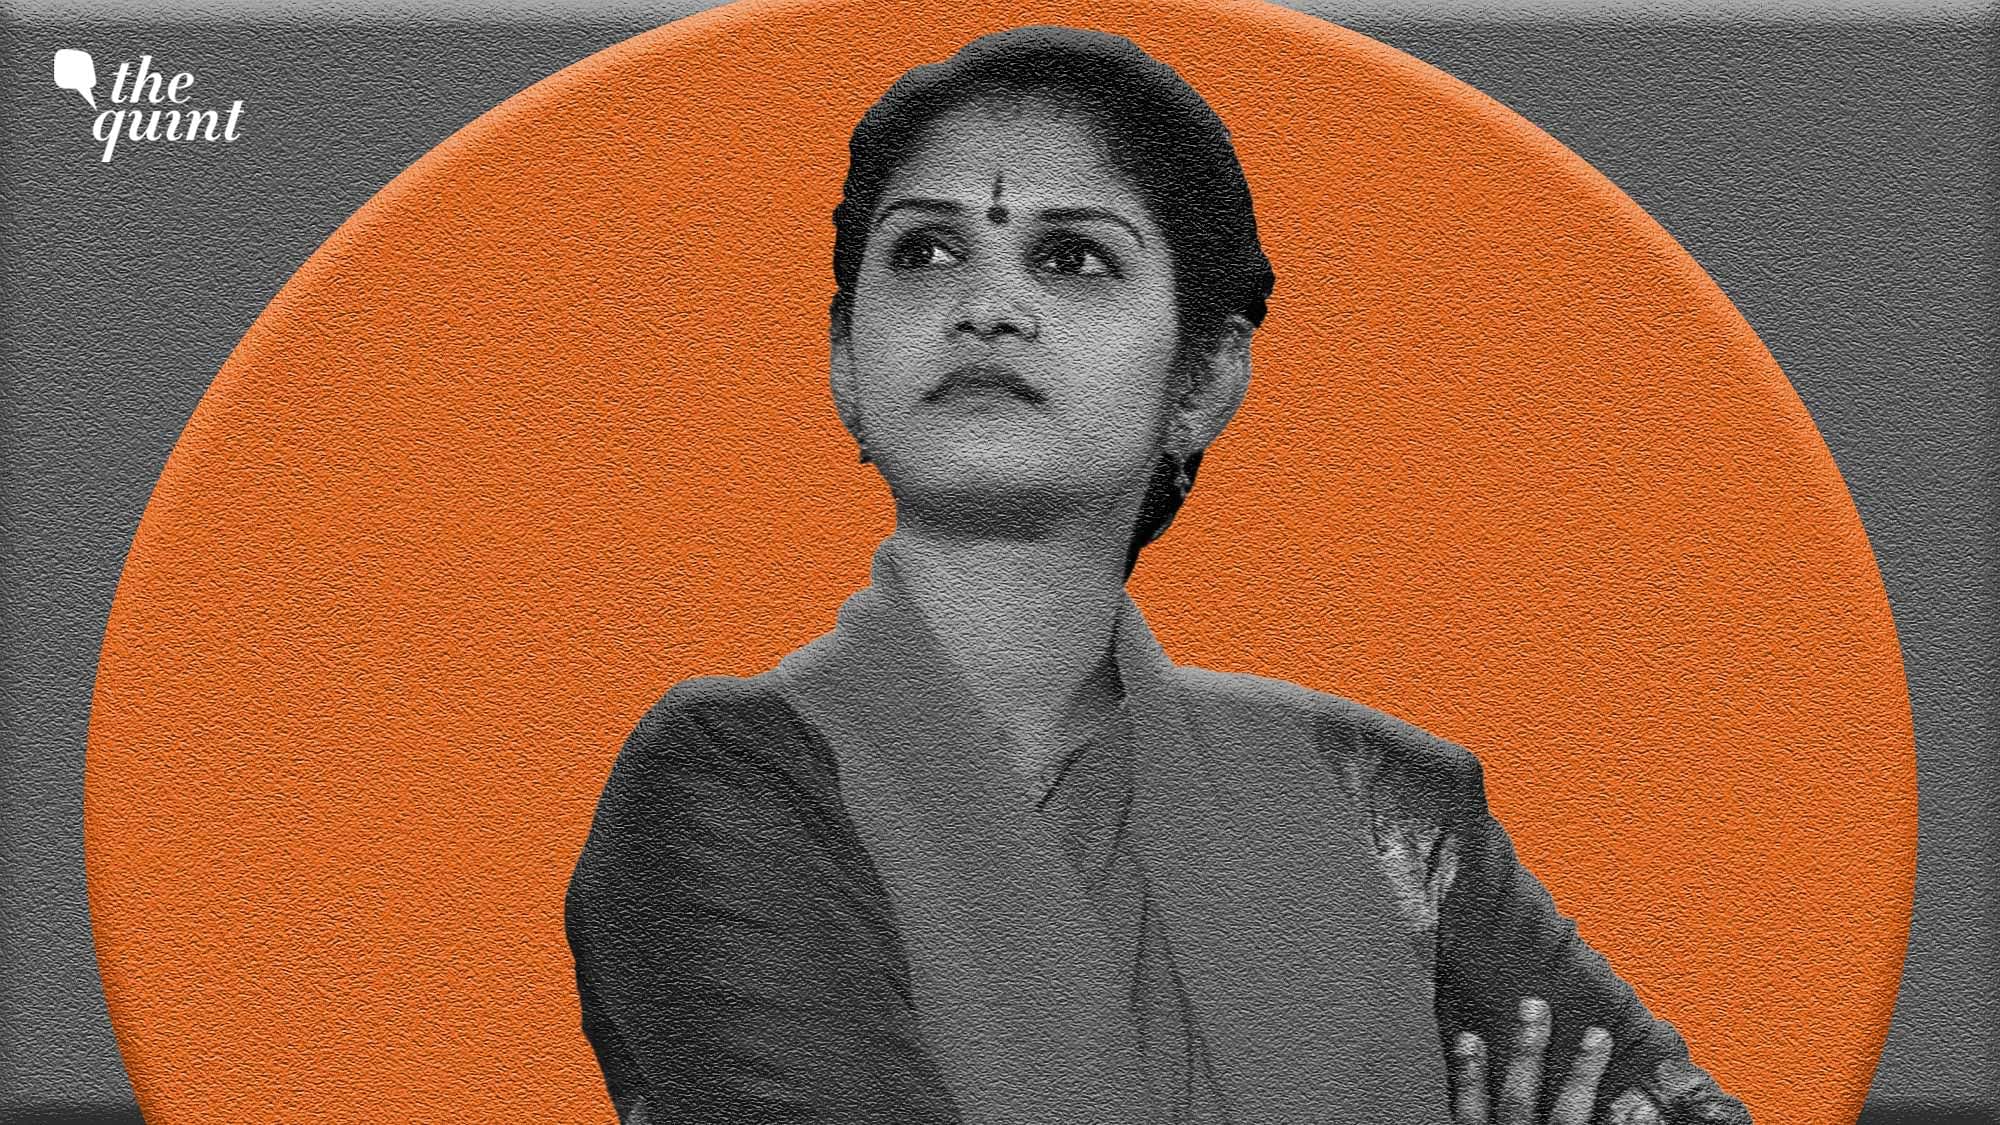 <div class="paragraphs"><p>Chaithra Kundapura isn't new to controversies or arrests. From making provocative speeches to participating in anti-Muslim rallies, her rise as the poster girl of Hindutva over the past few years has been staggering.</p></div>